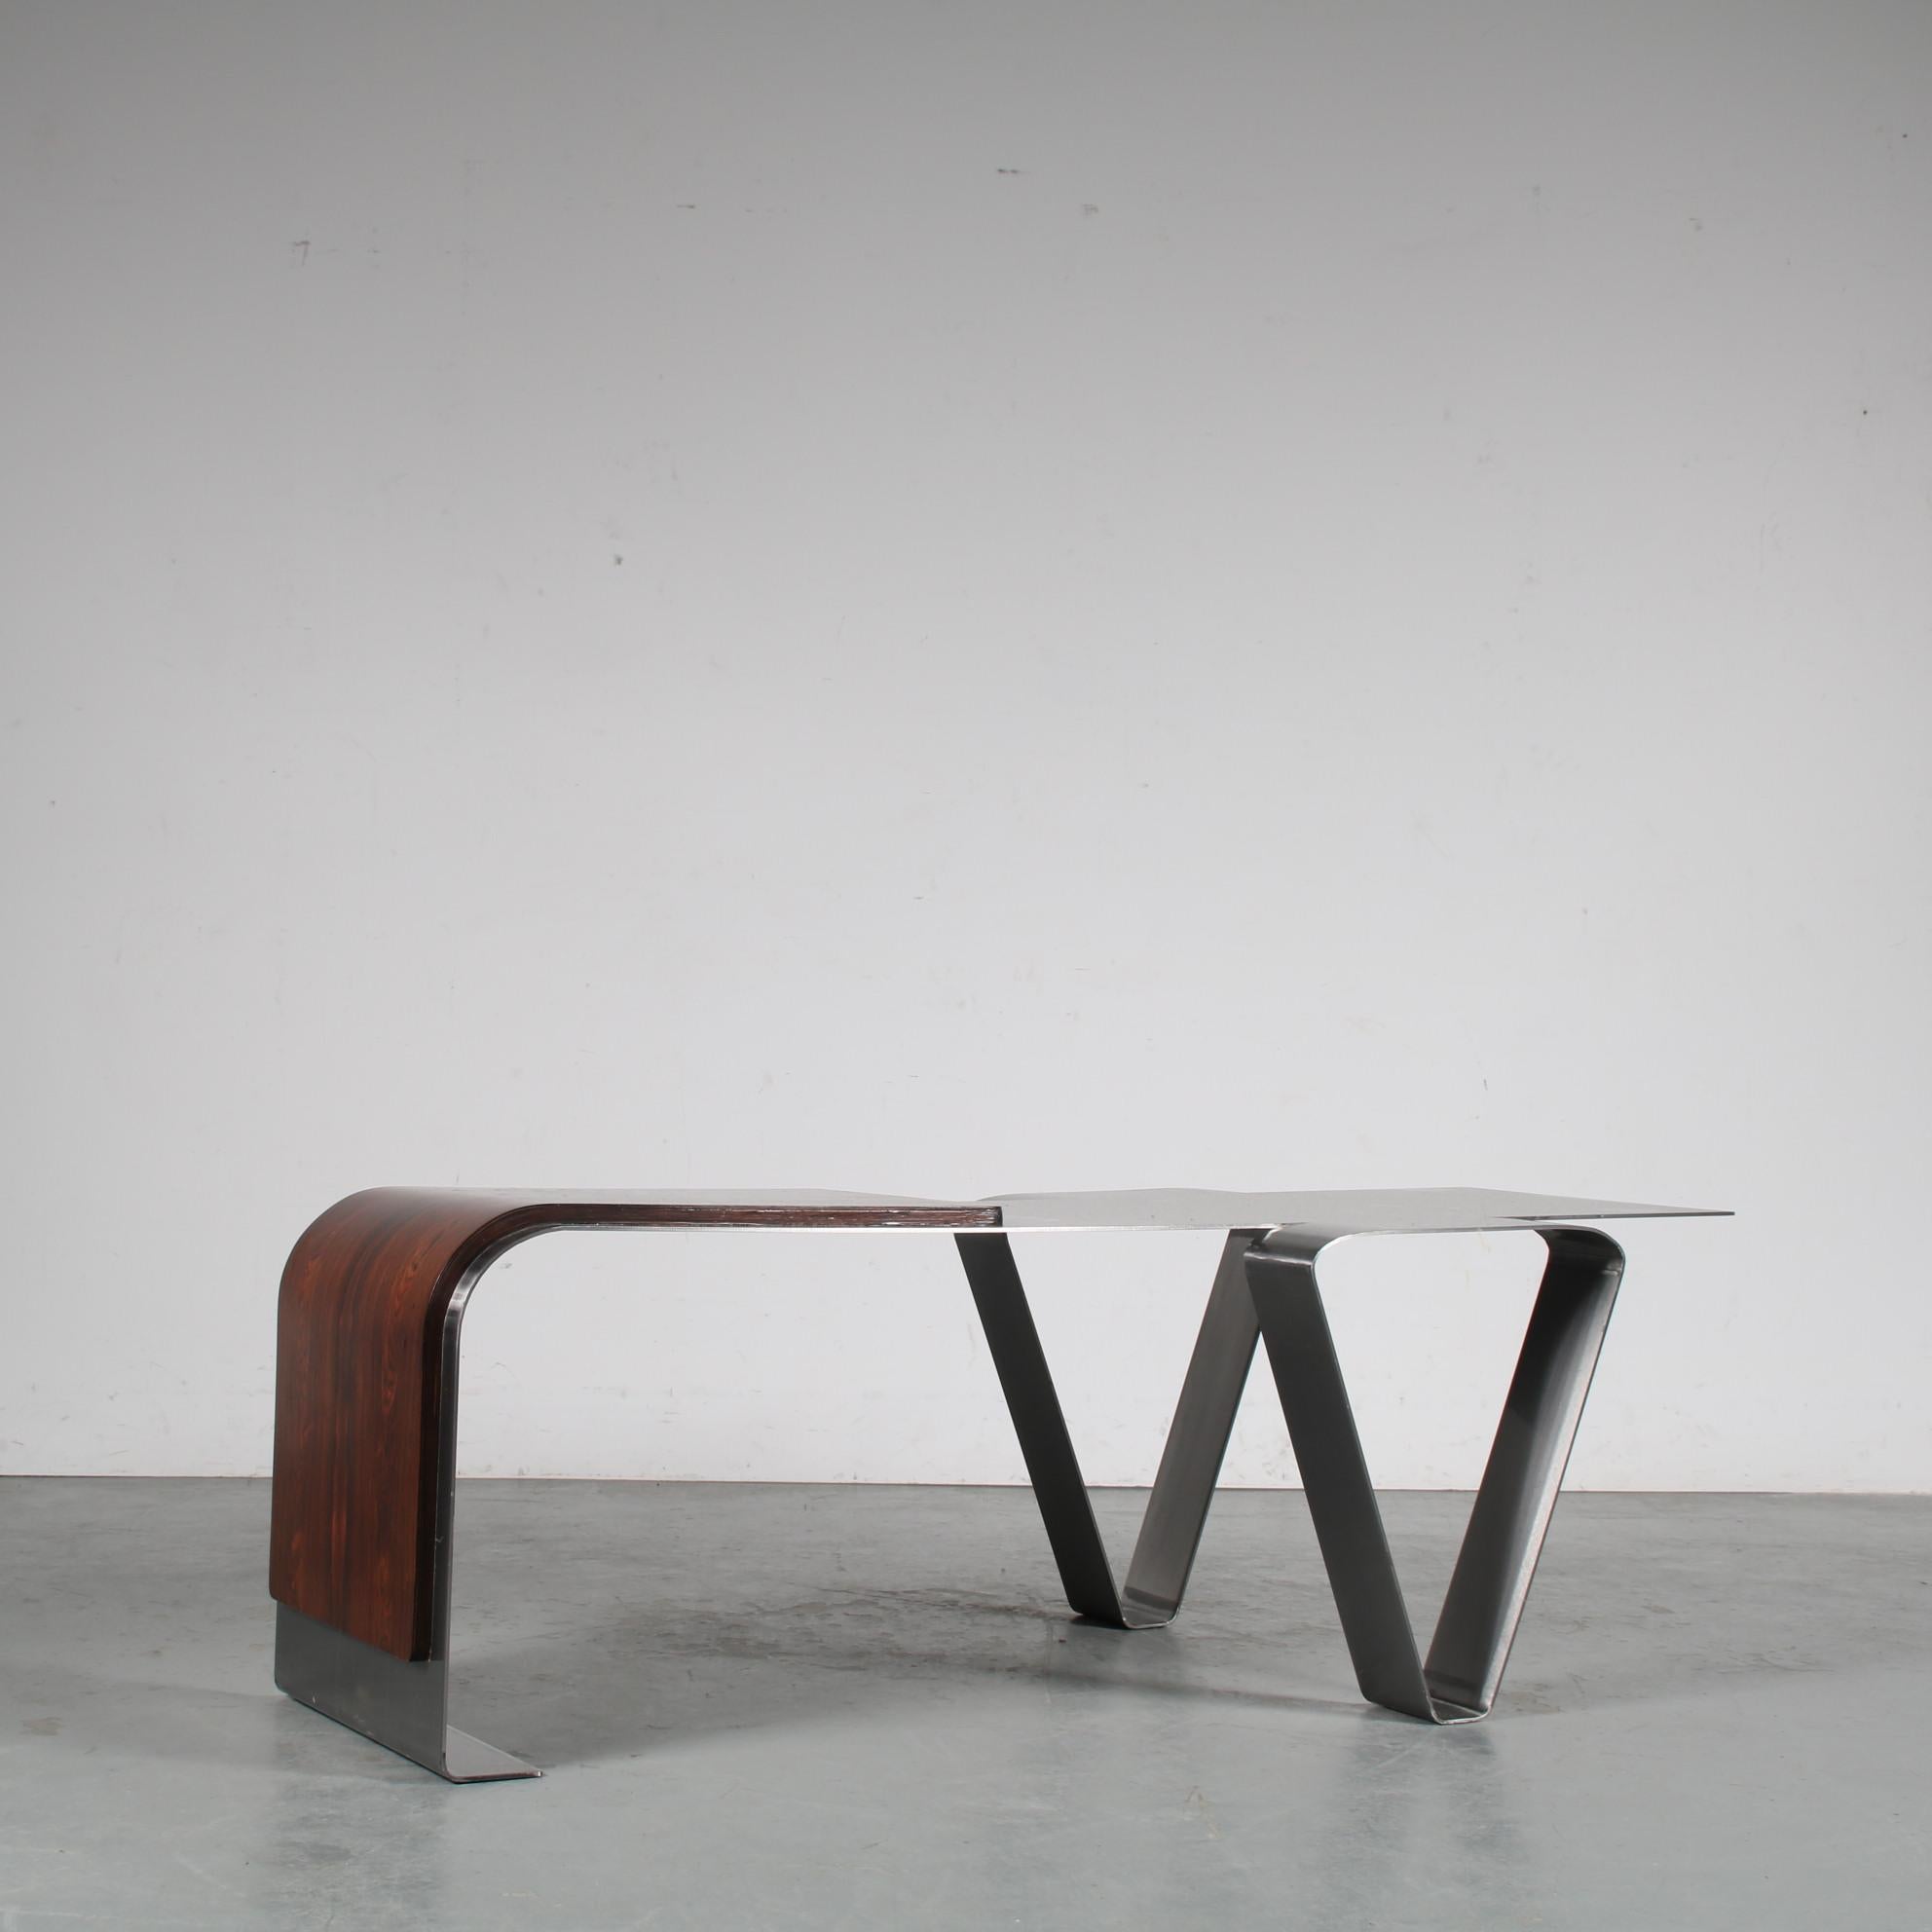 An eye-catching coffee table manufactured in France around 1970.

It is designed in the style of the pieces by Michel Boyer that were produced for the Rothschild bank. The use of stainless steel, cut and bent into a unique modern shape, gives it